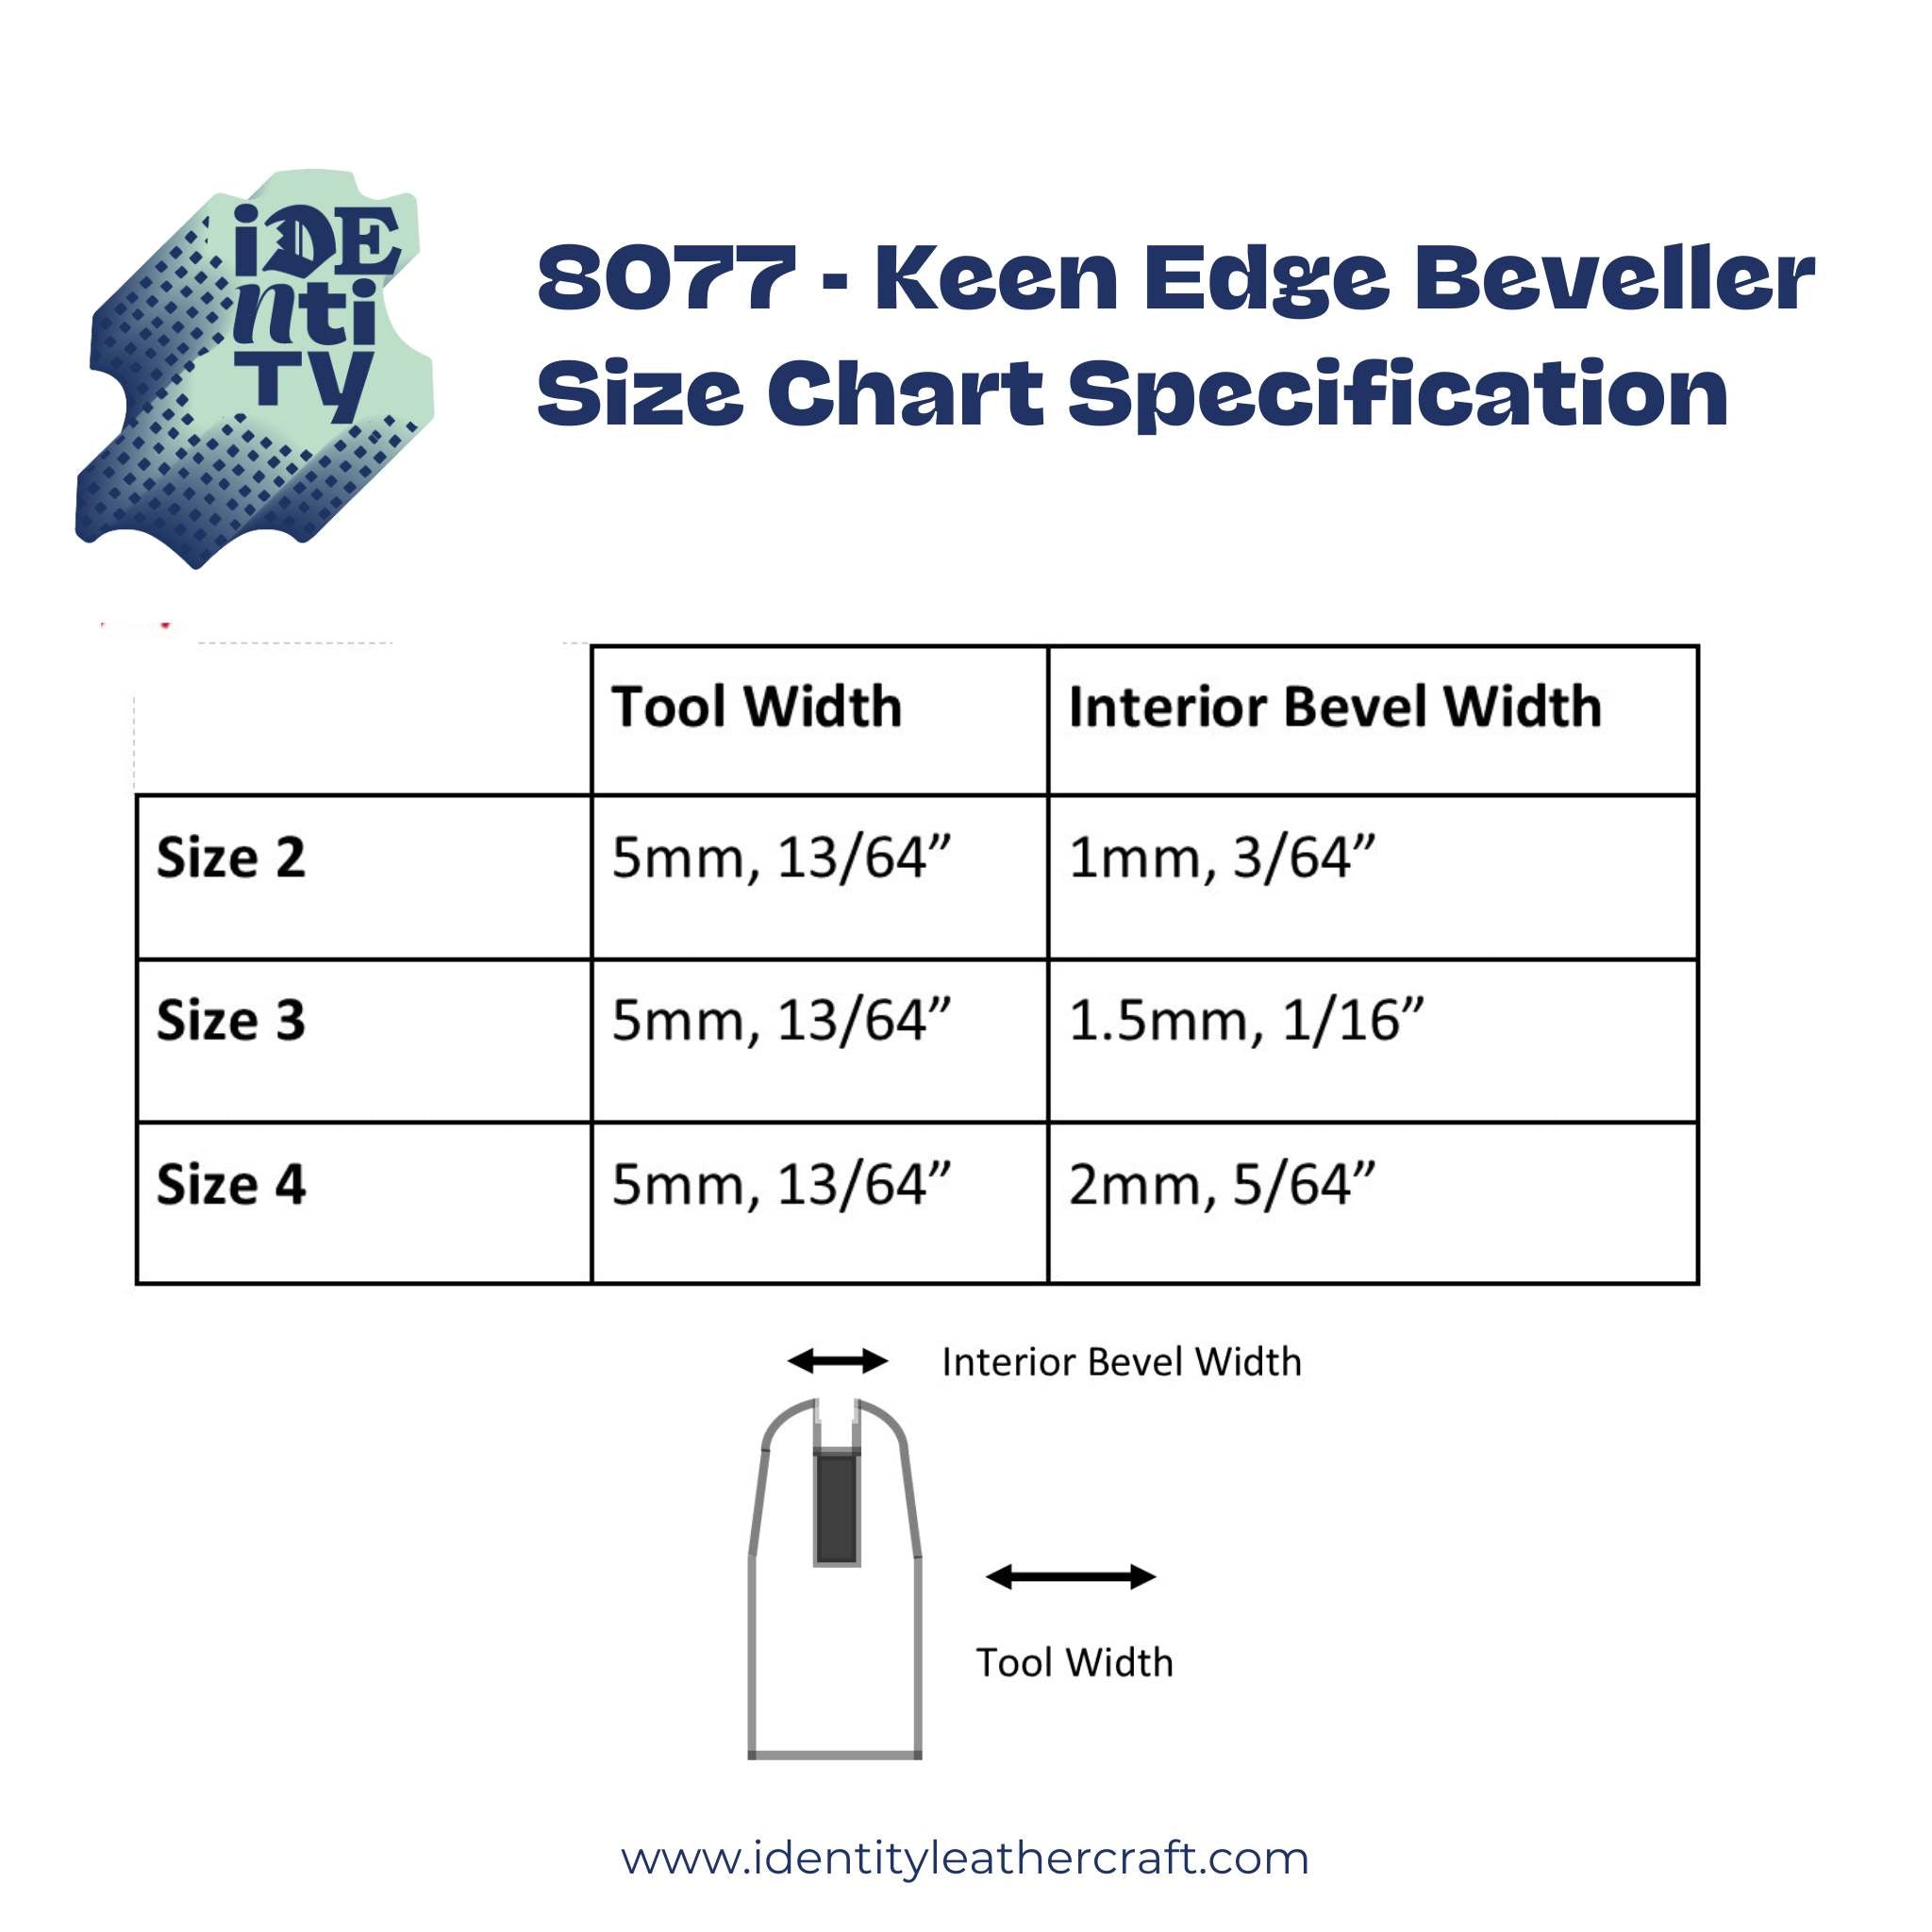 Size Chart to show the measurements of the interior bevel for Identity Leathercraft Keen Edge Bevellers